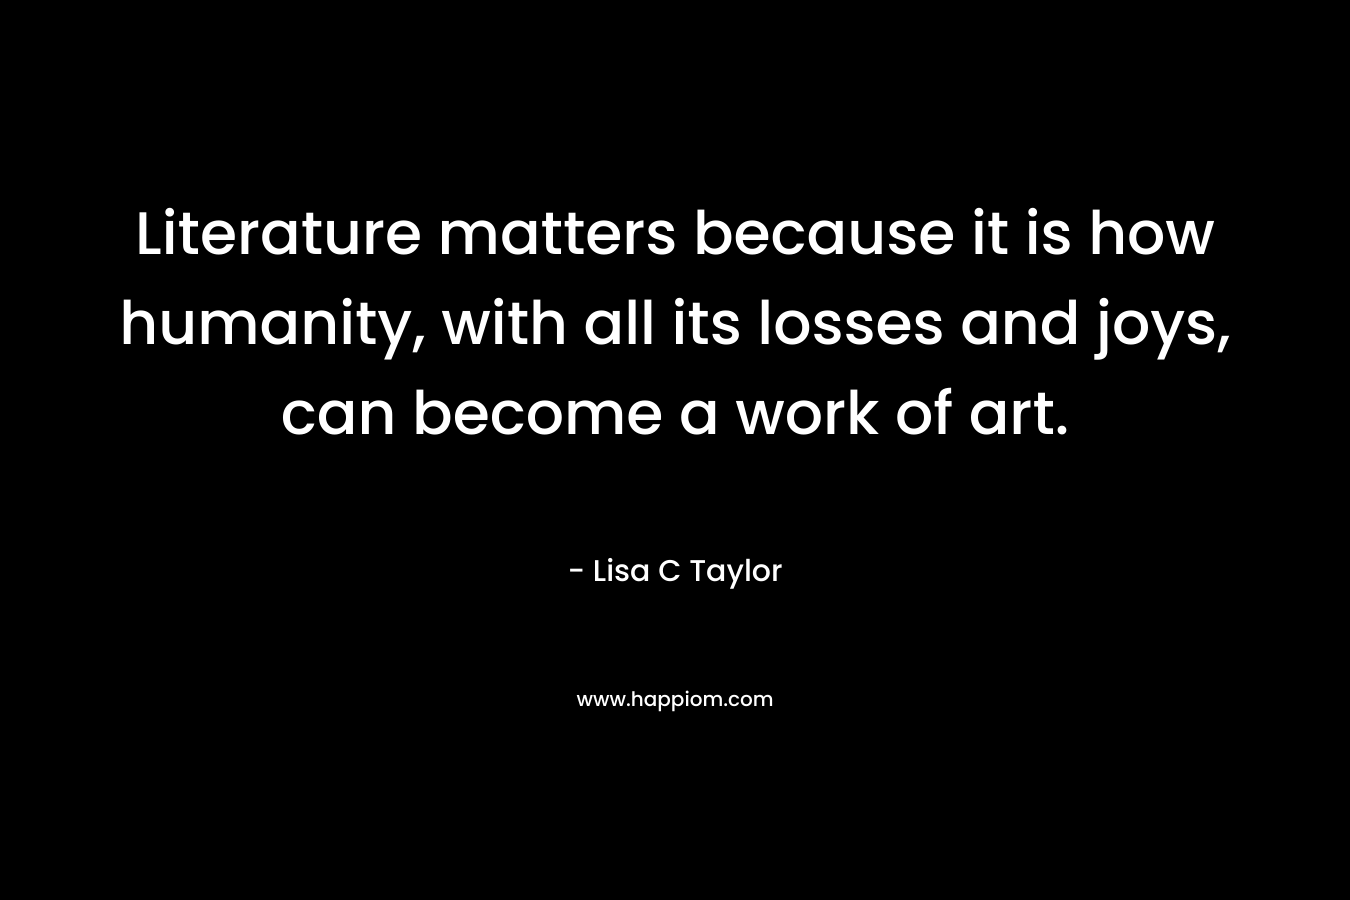 Literature matters because it is how humanity, with all its losses and joys, can become a work of art. – Lisa C Taylor